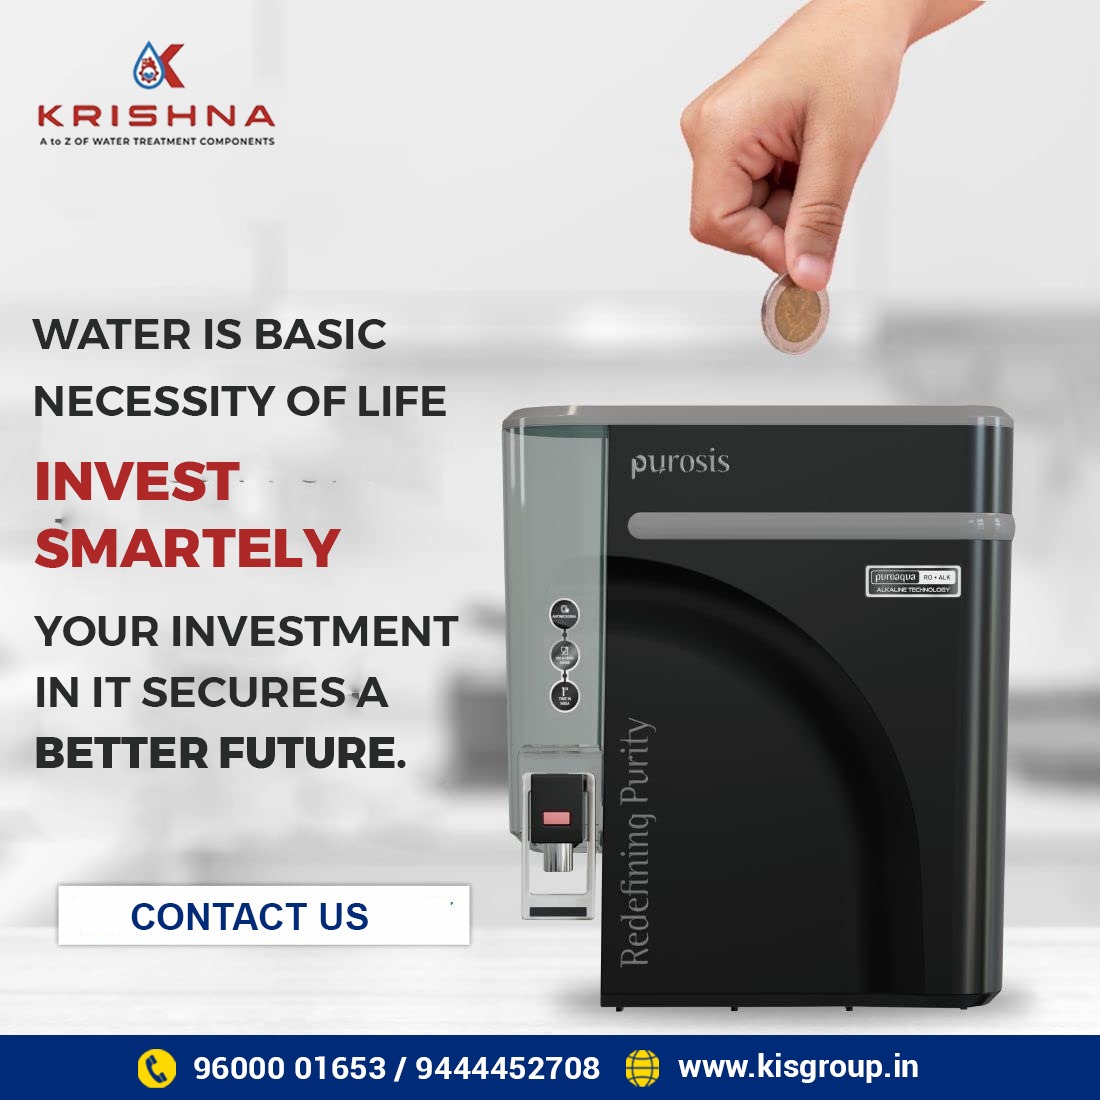 Pure hydration, pure satisfaction! Discover the difference with our advanced water purification systems. Say goodbye to impurities and hello to crisp, refreshing hydration. Your health deserves the best!
visit us@ kisgroup.in
#waterpurification #kisgroup #watersoftner